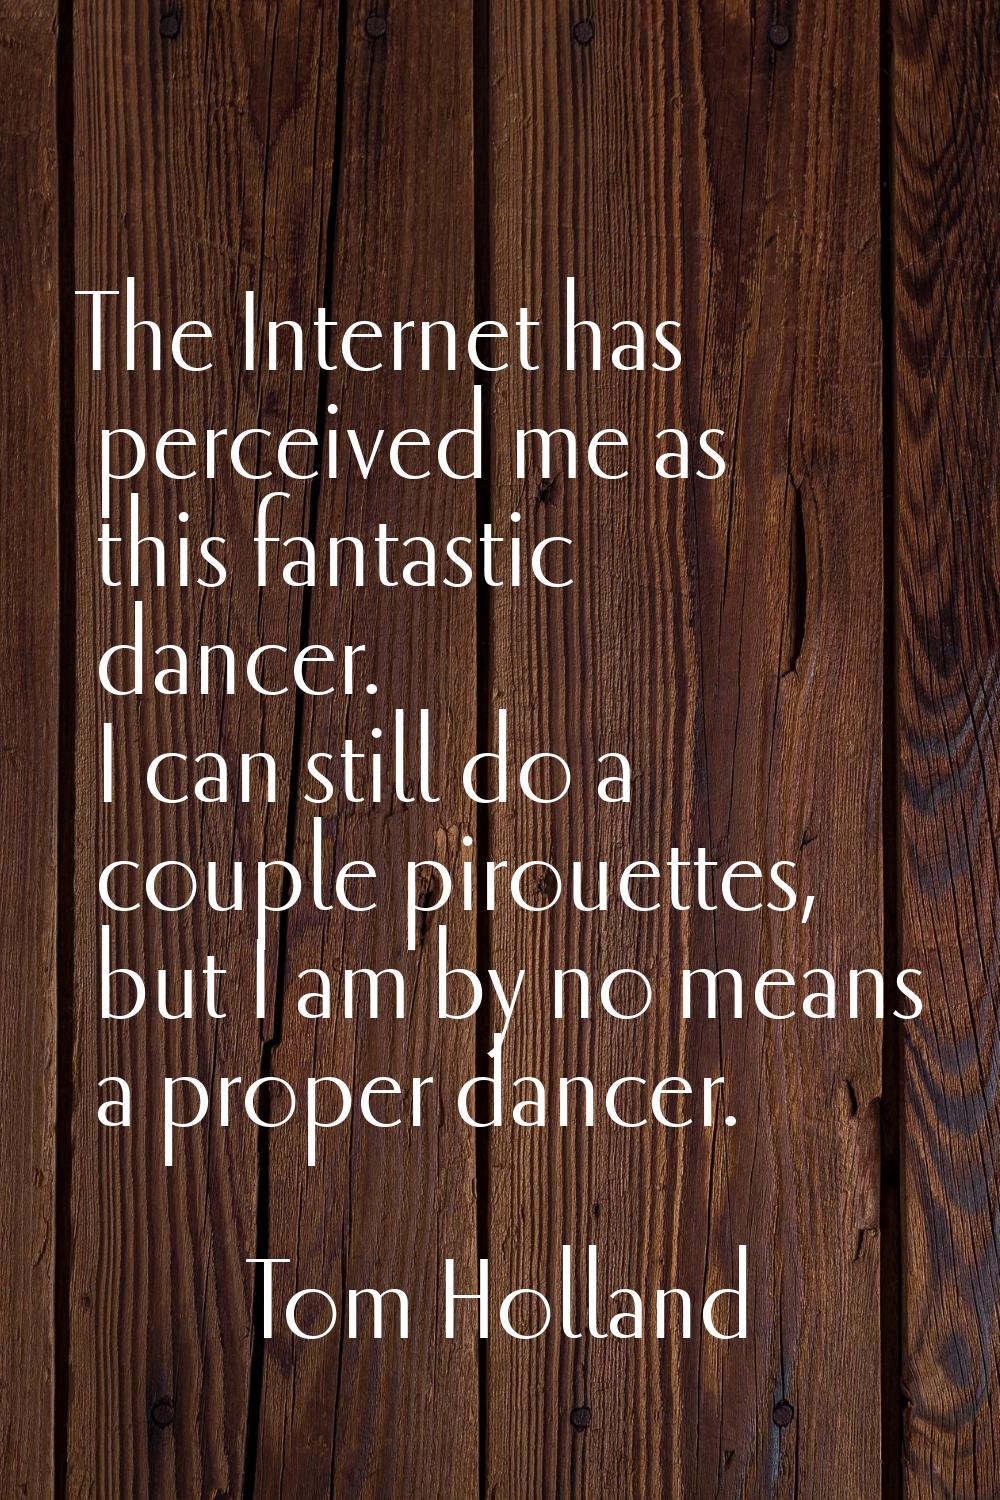 The Internet has perceived me as this fantastic dancer. I can still do a couple pirouettes, but I a